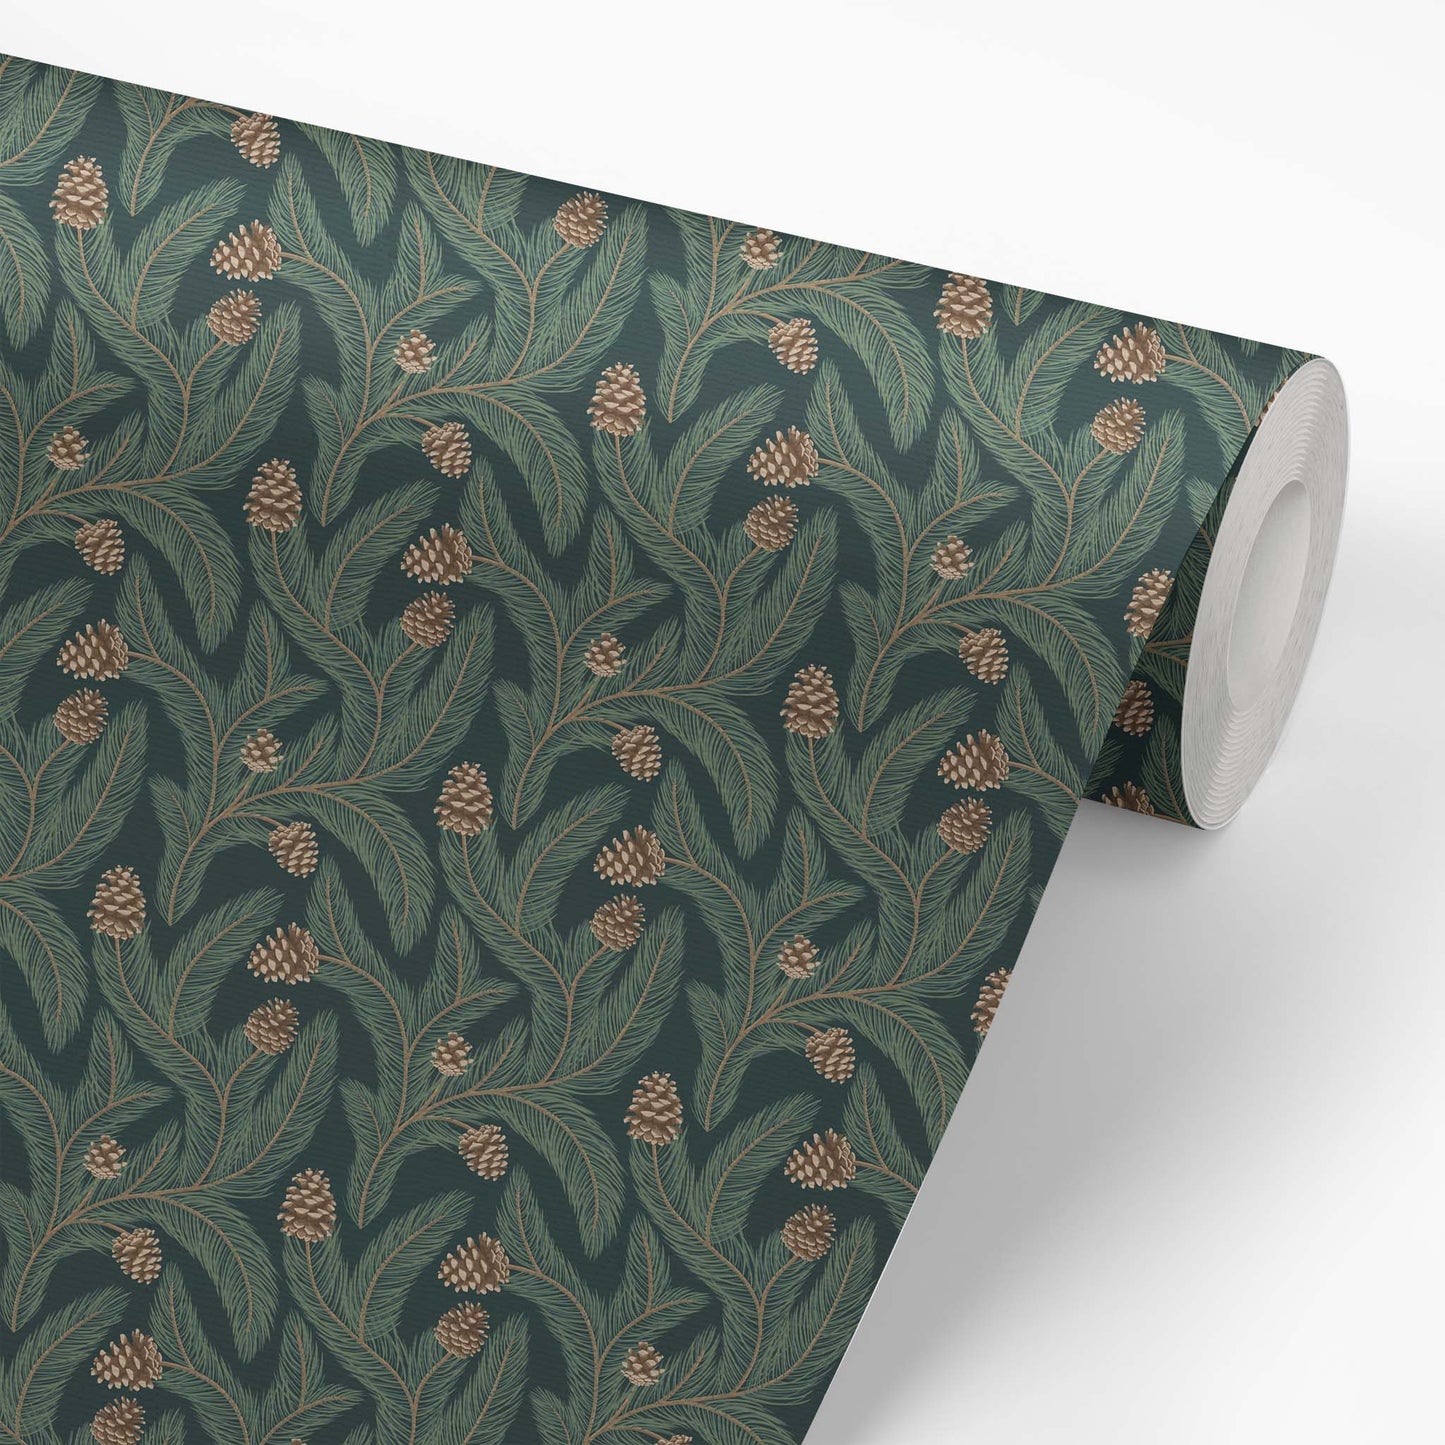 Wallpaper panel featuring Cayla Naylor Sitka- Forest Peel and Stick Wallpaper - a nature inspired pattern